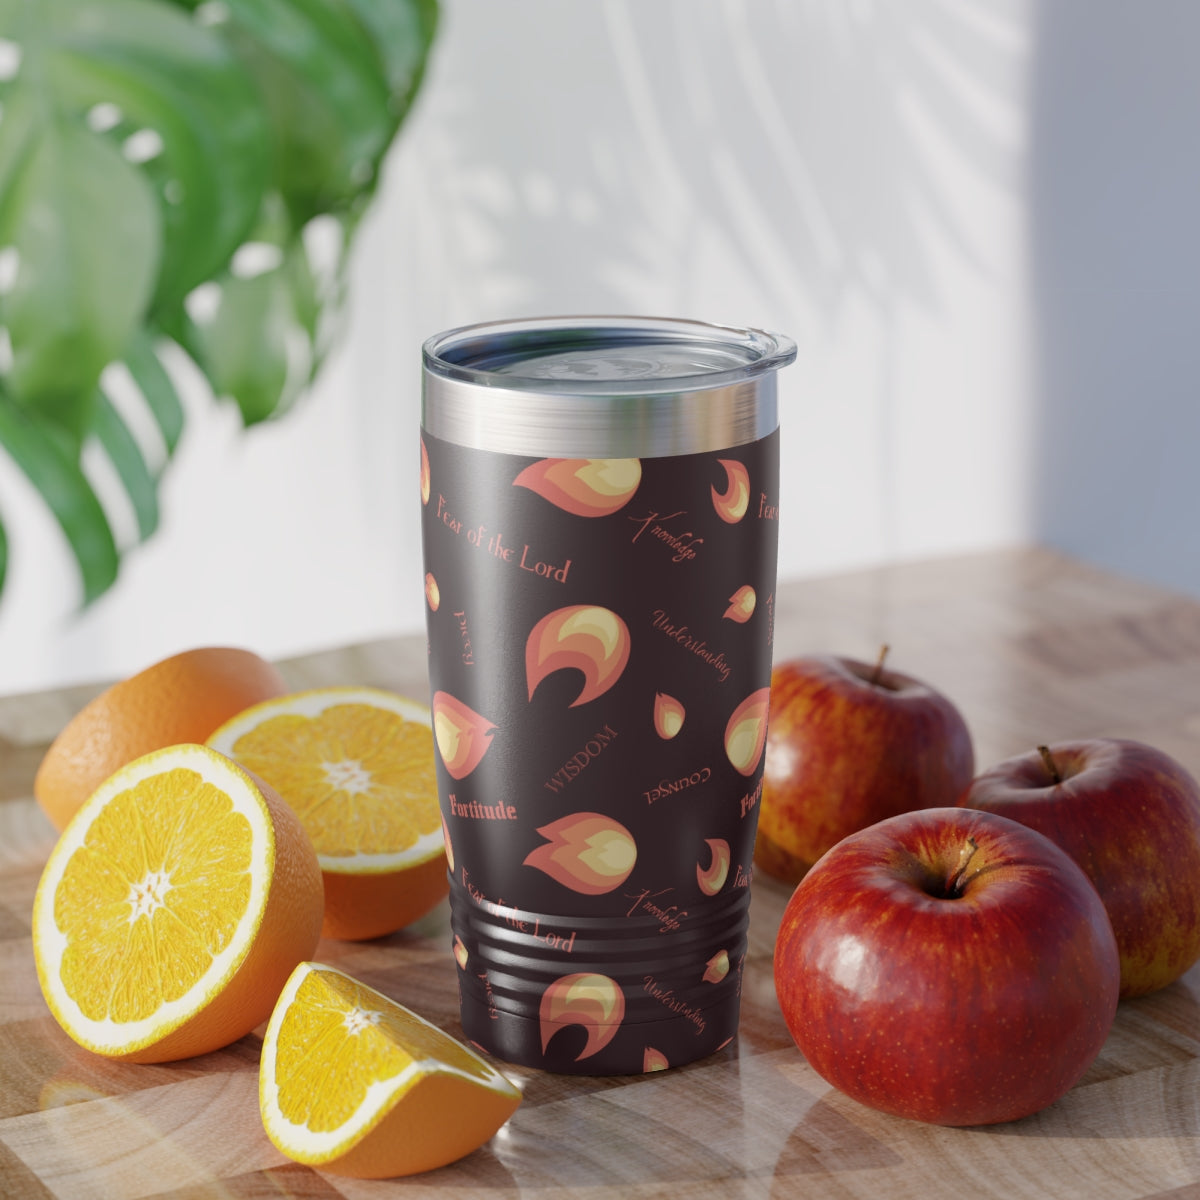 A brown Catholic travel mug on a table with apples and oranges. The mug is decorated with flames and the gifts of the Holy Spirit written out.